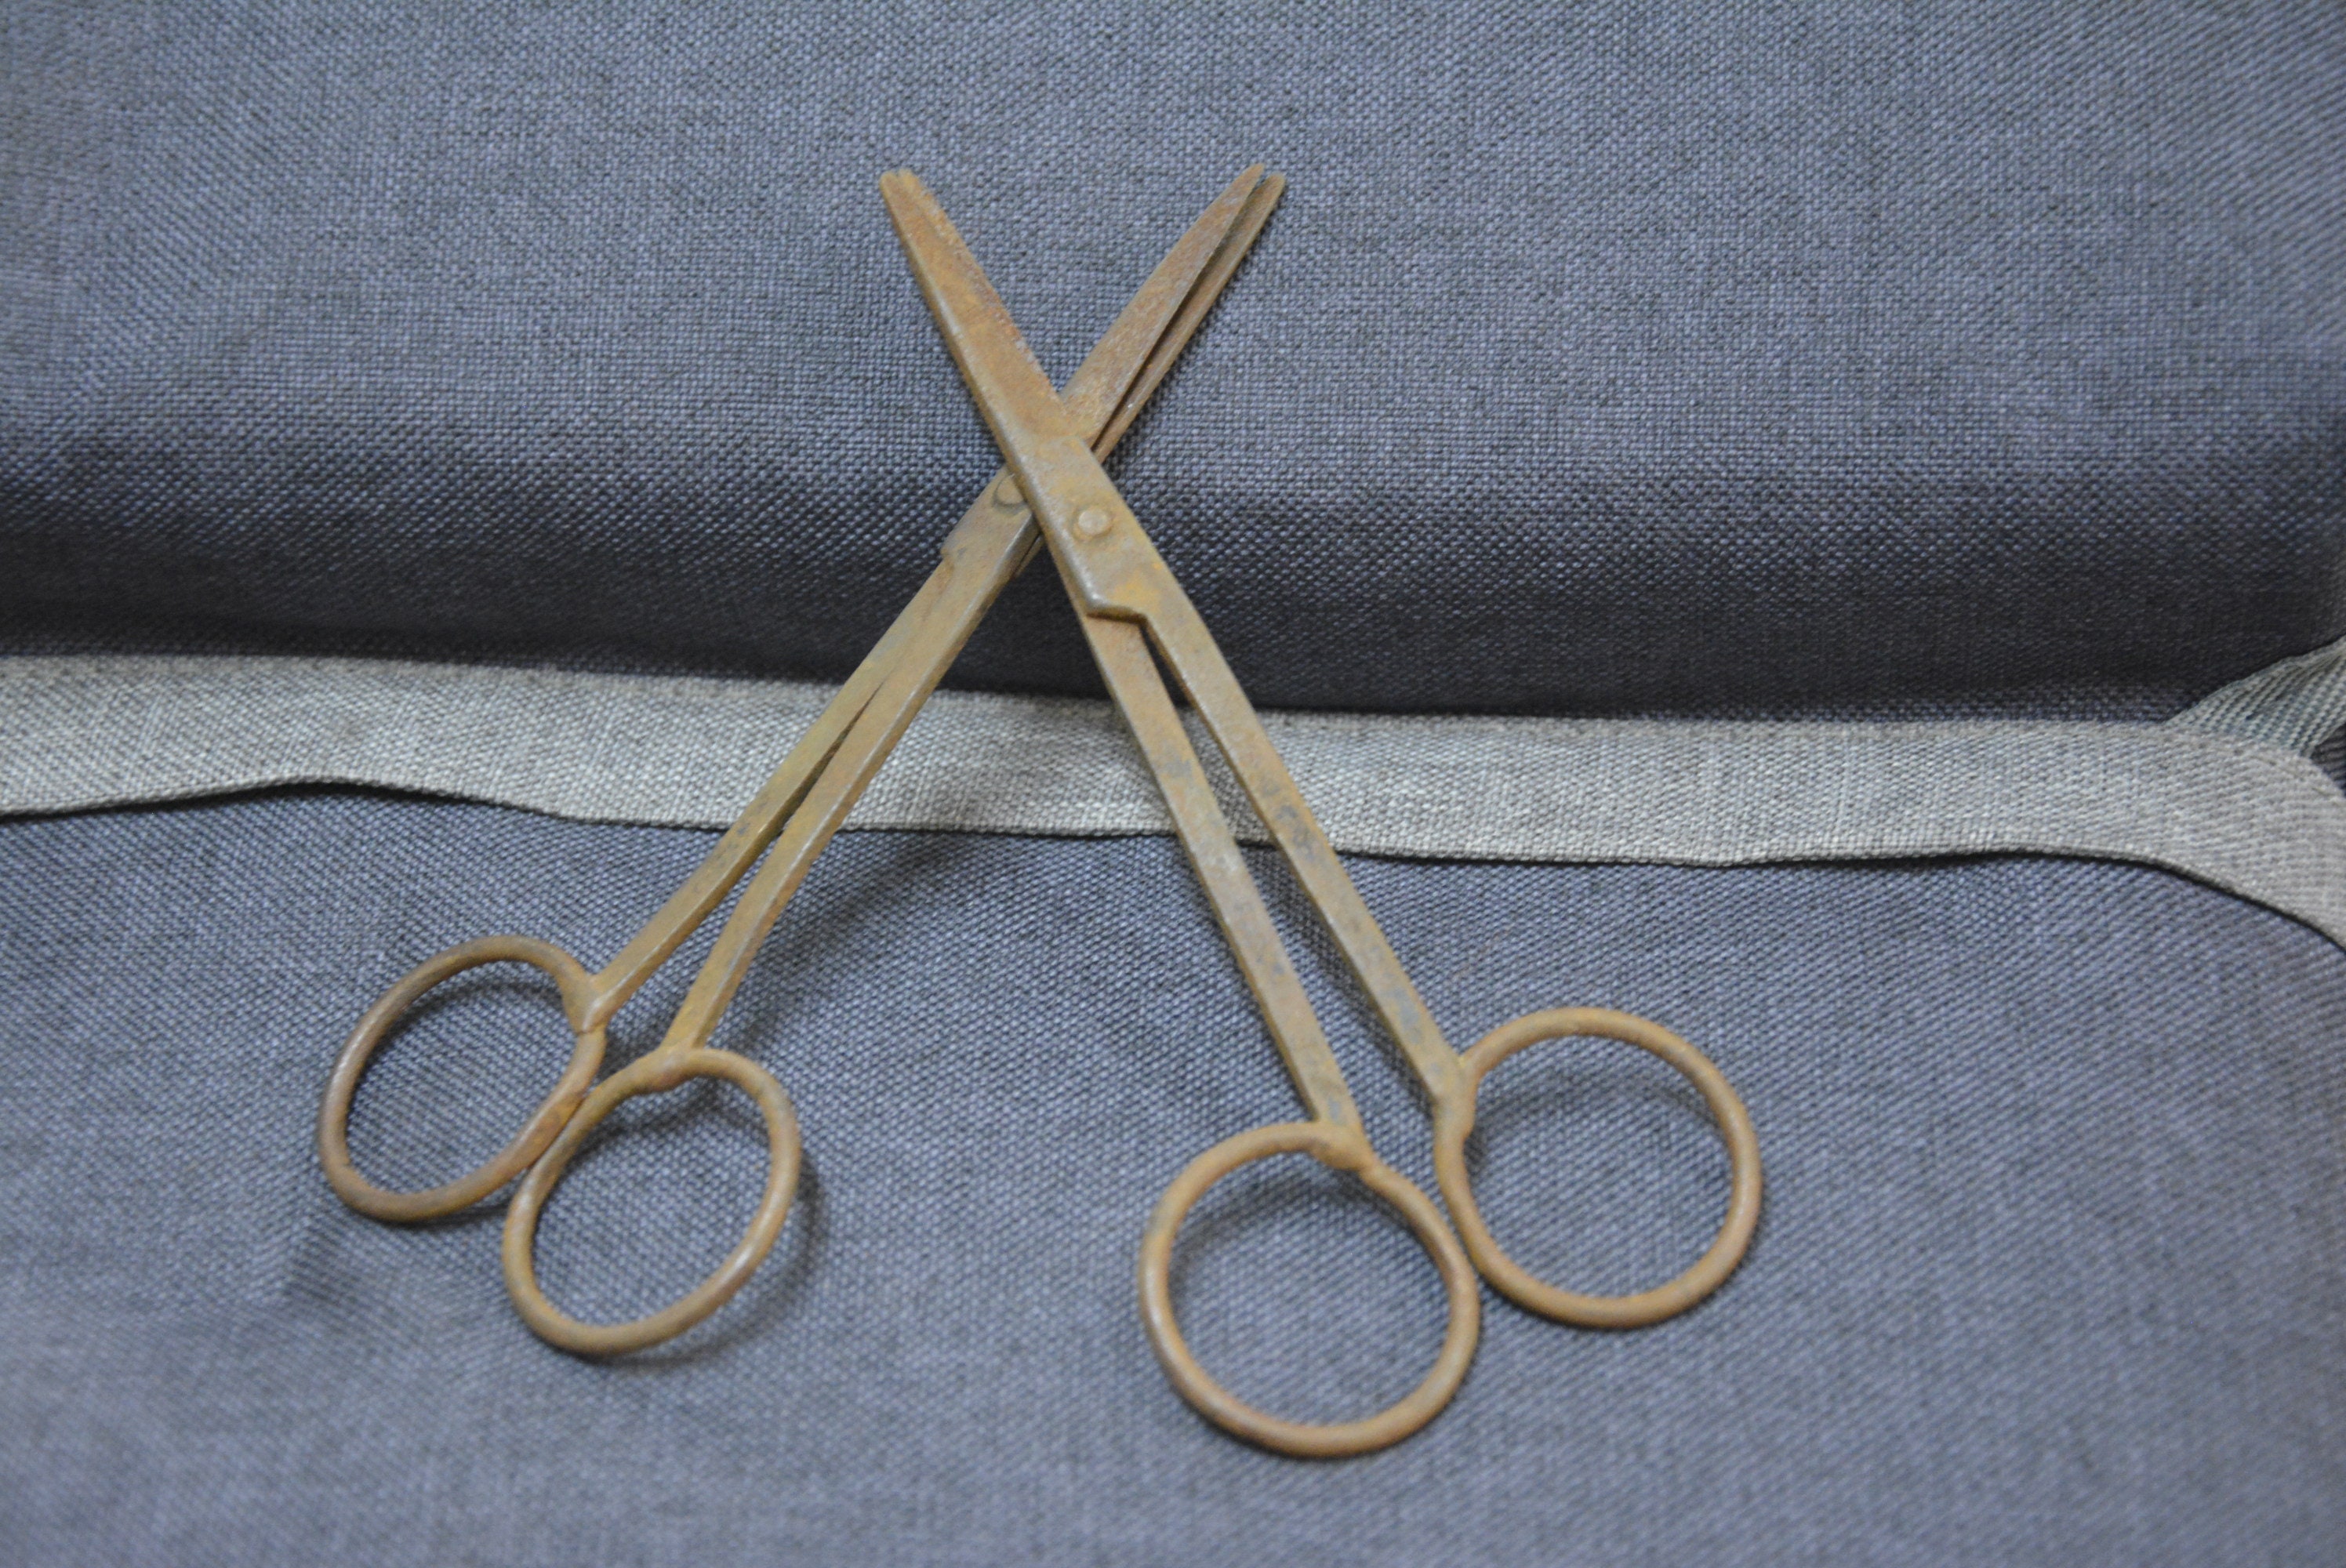 Elegant Small Scissors for Paper Crafting, Beauty or Seamstress, Available  in Gun Metal or Red Bronze 